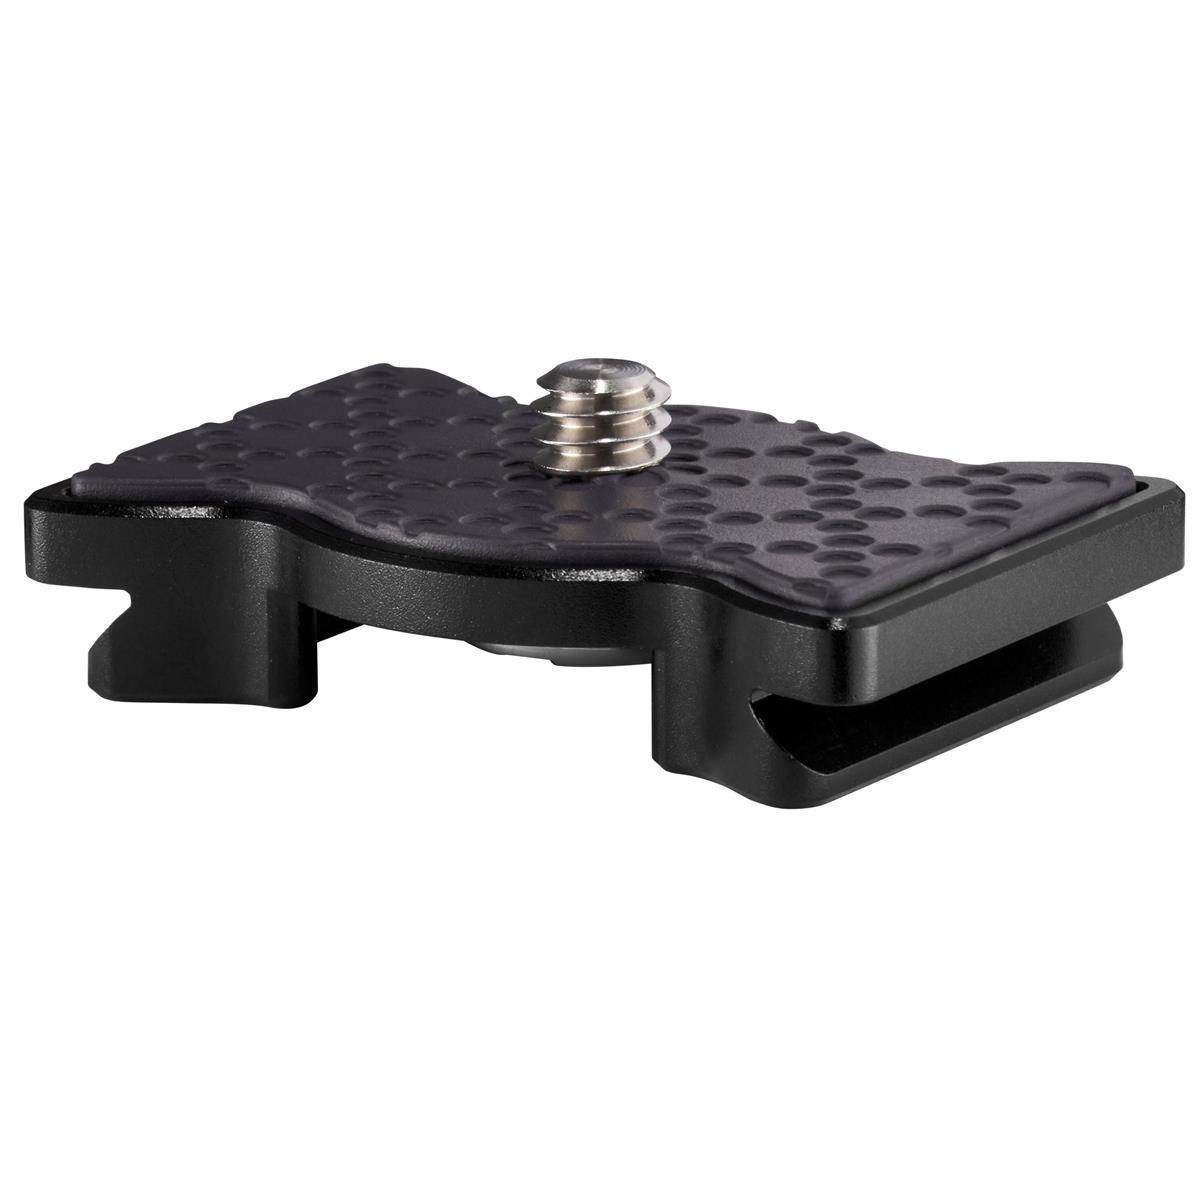 Joby Quick Release Plate 3K PRO